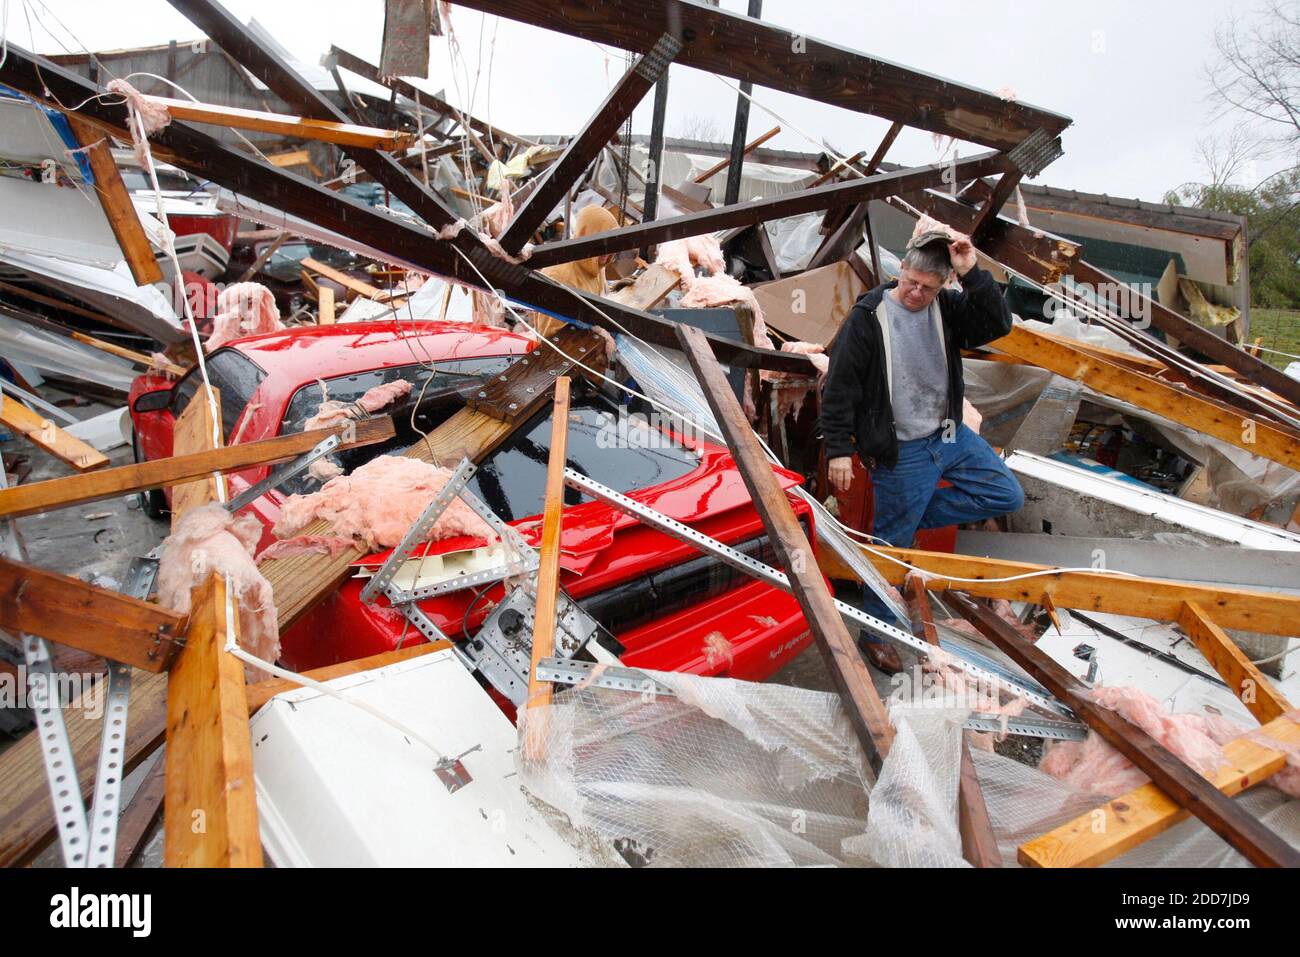 Don Chapman, with the help of Richard Jones in background, started the process of cleaning up his shop in Harrodsburg, Kentucky, Wednesday, February 6, 2008. Early morning storms caused heavy damage throughout Central Kentucky with Mercer County being particularly hard hit. His shop housed a 1991 Firebird, a 1949 Mercury, a 1976 Jeep, a 1971 GMC Sprint, a large boat, and numerous tools. Photo by Charles Bertram/Lexington Herald-Leader/MCT/ABACAPRESS.COM Stock Photo